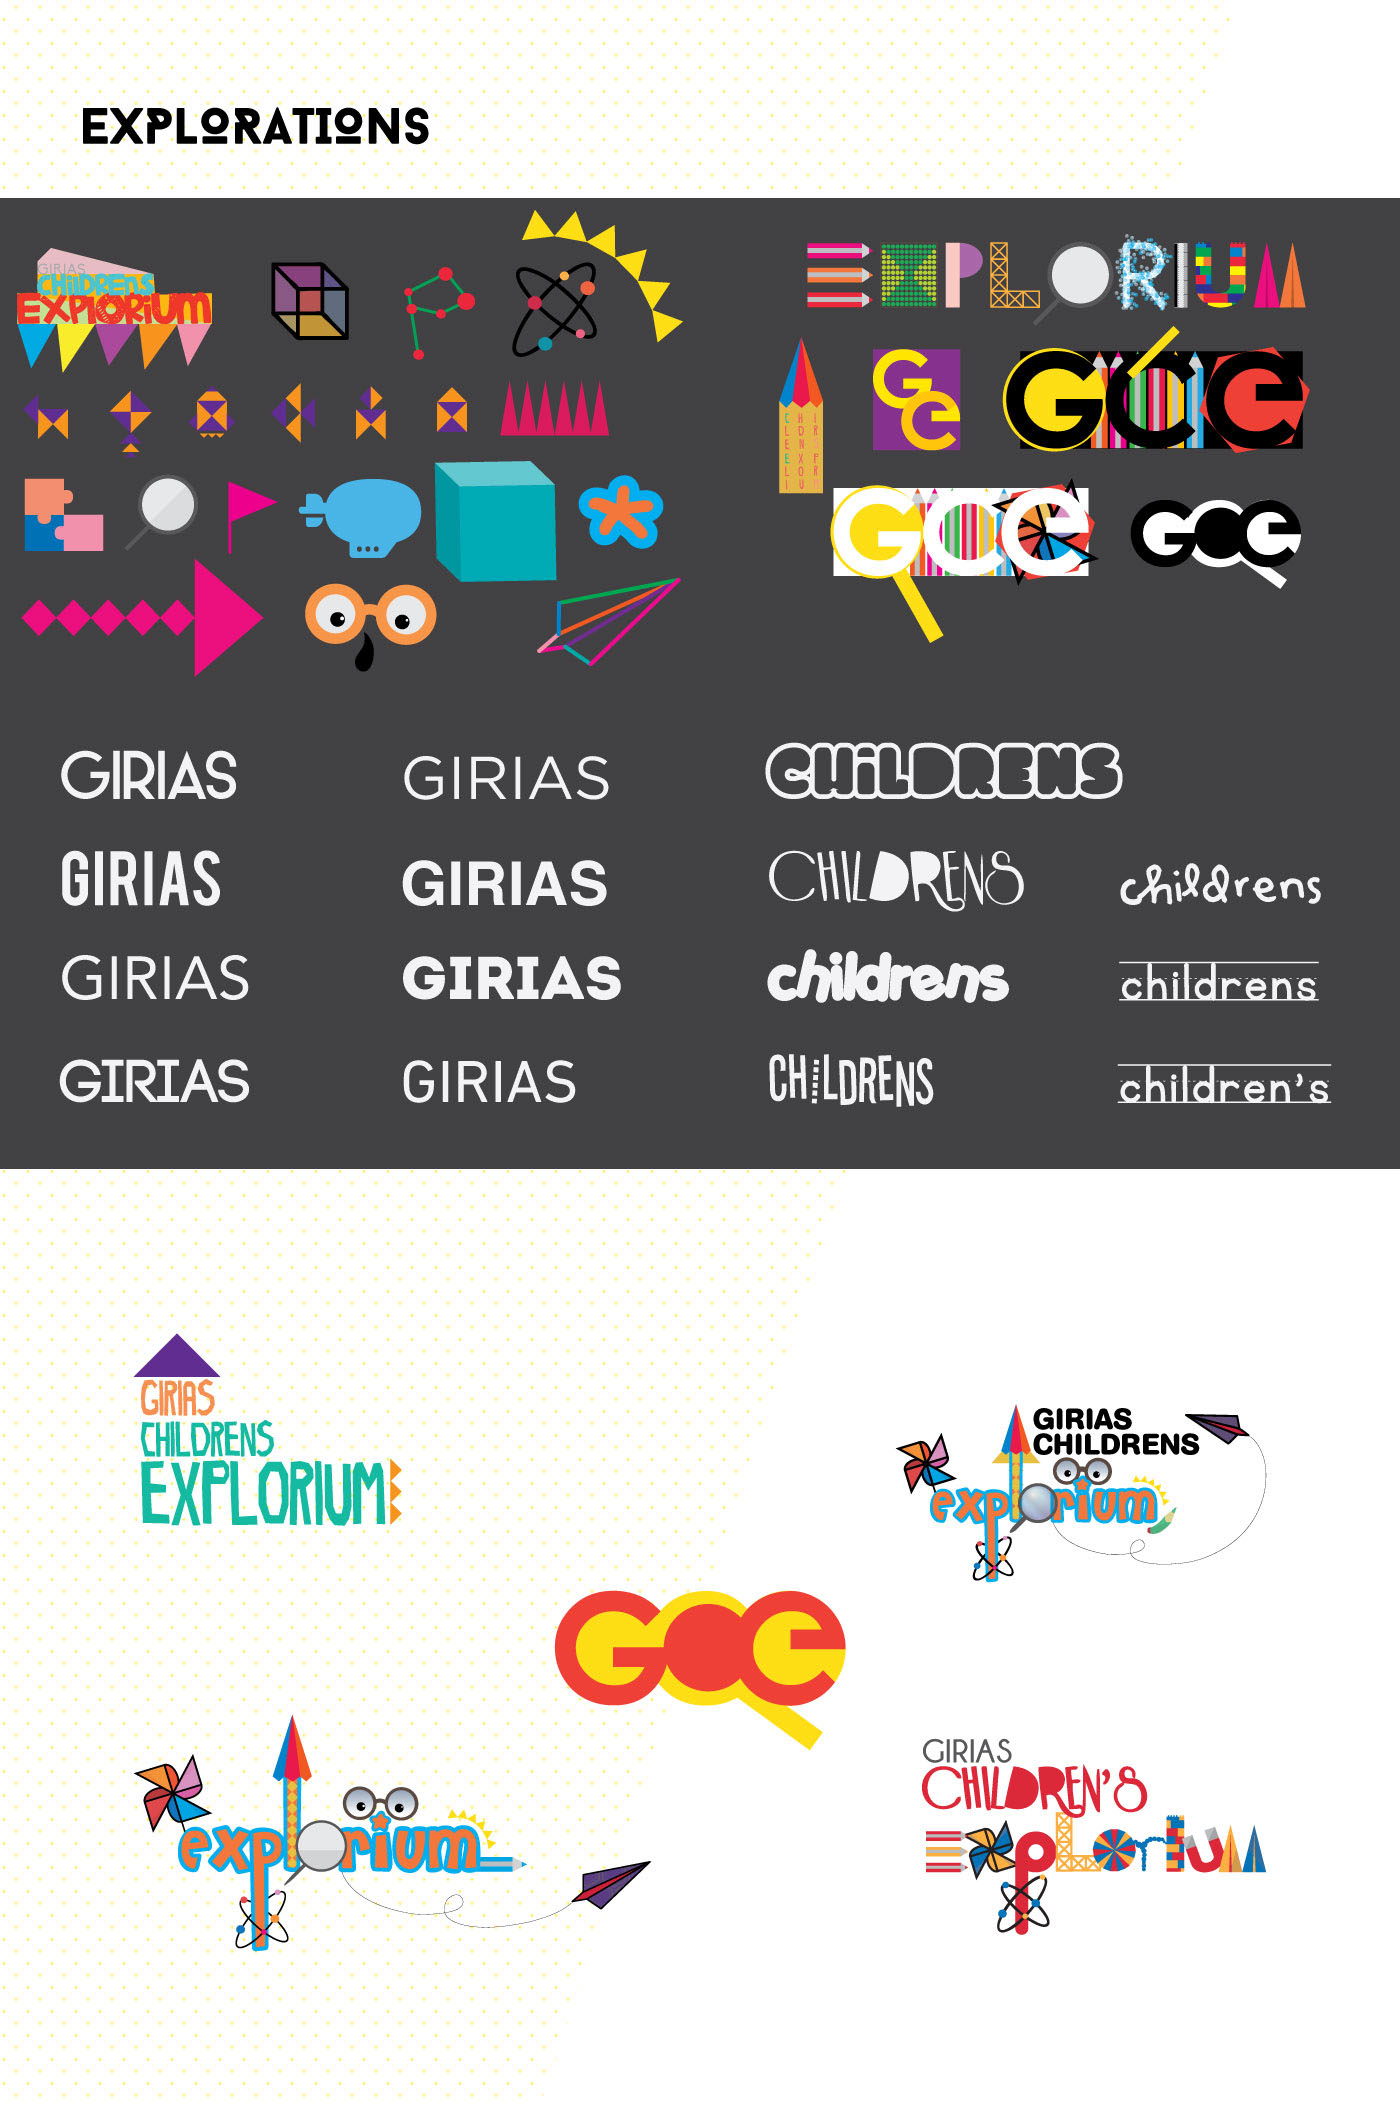 Gírias Images  Photos, videos, logos, illustrations and branding on Behance